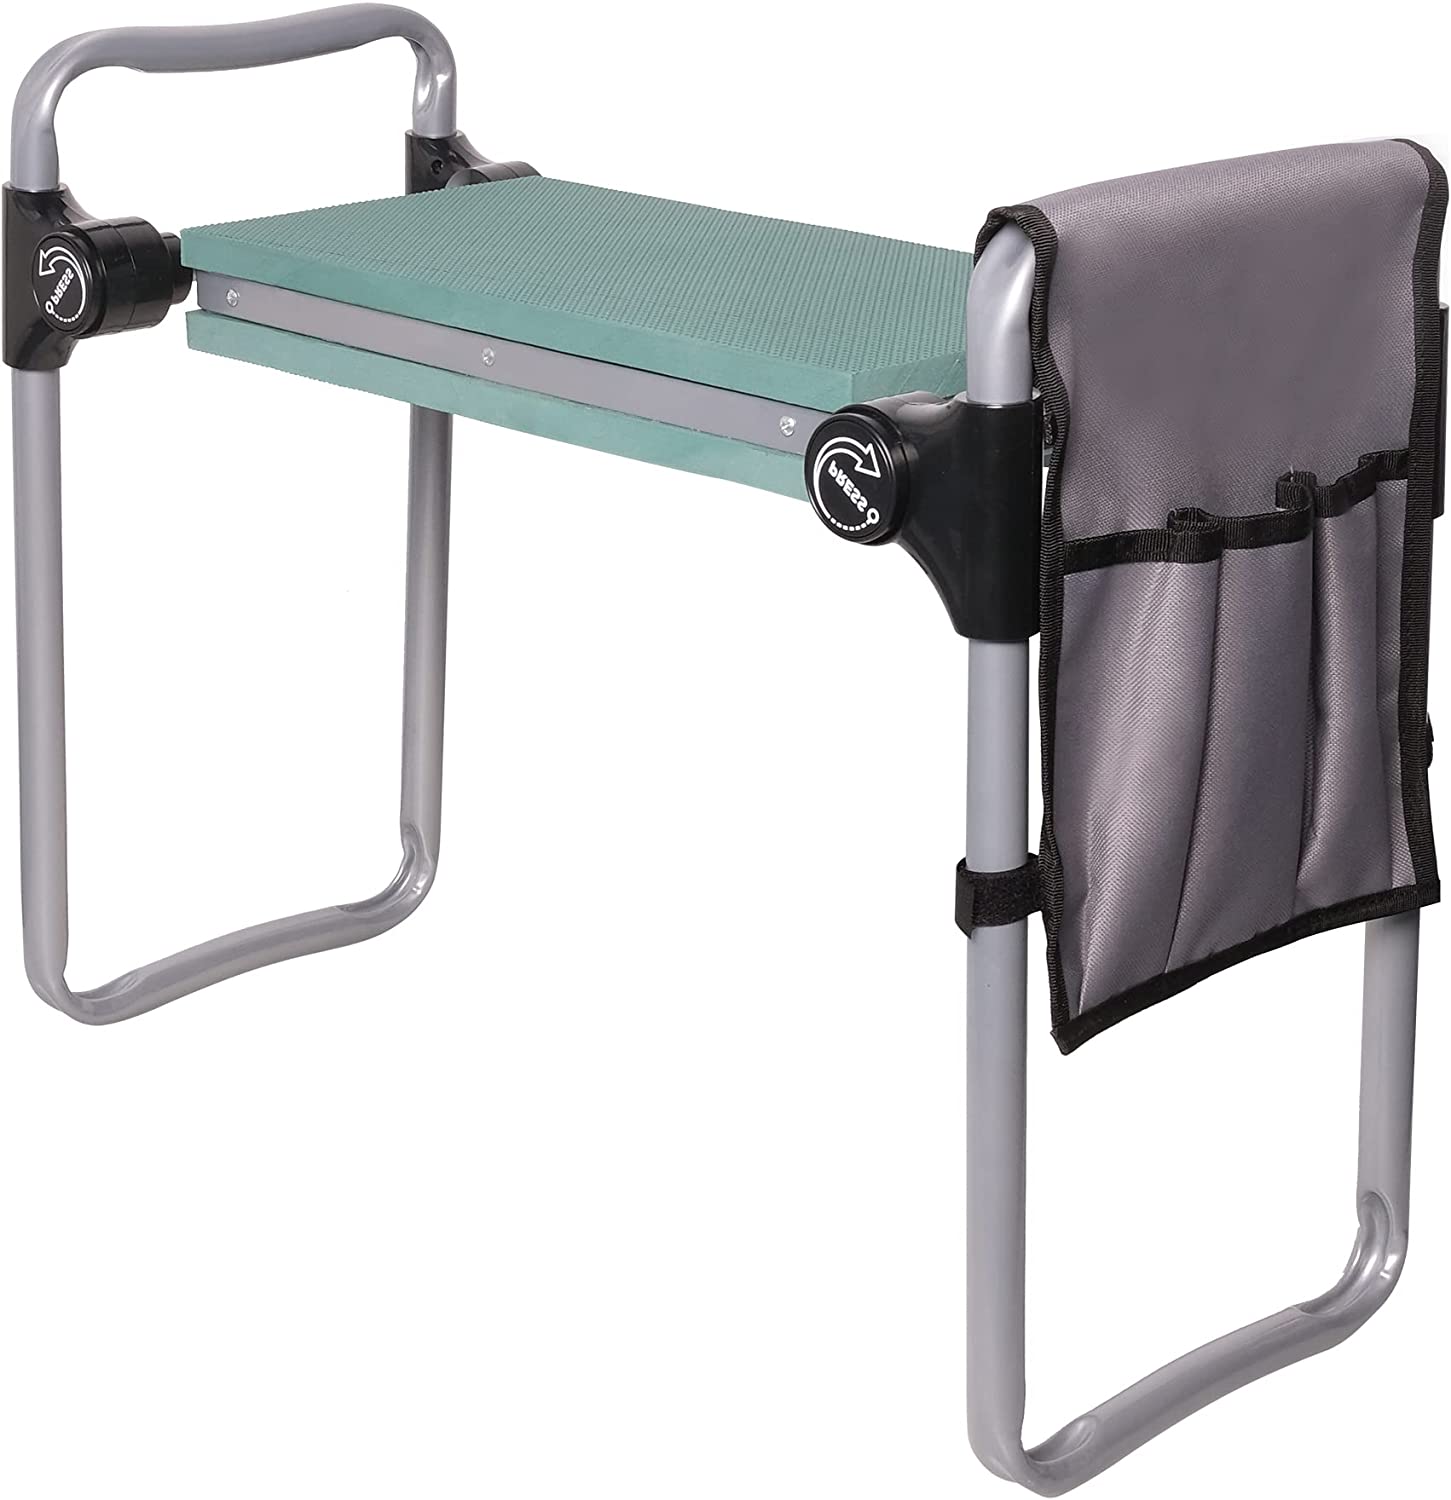 Widen Upgrade Foldable Garden Kneeler Bench and Seat Stool w/Tool Pocket, Green